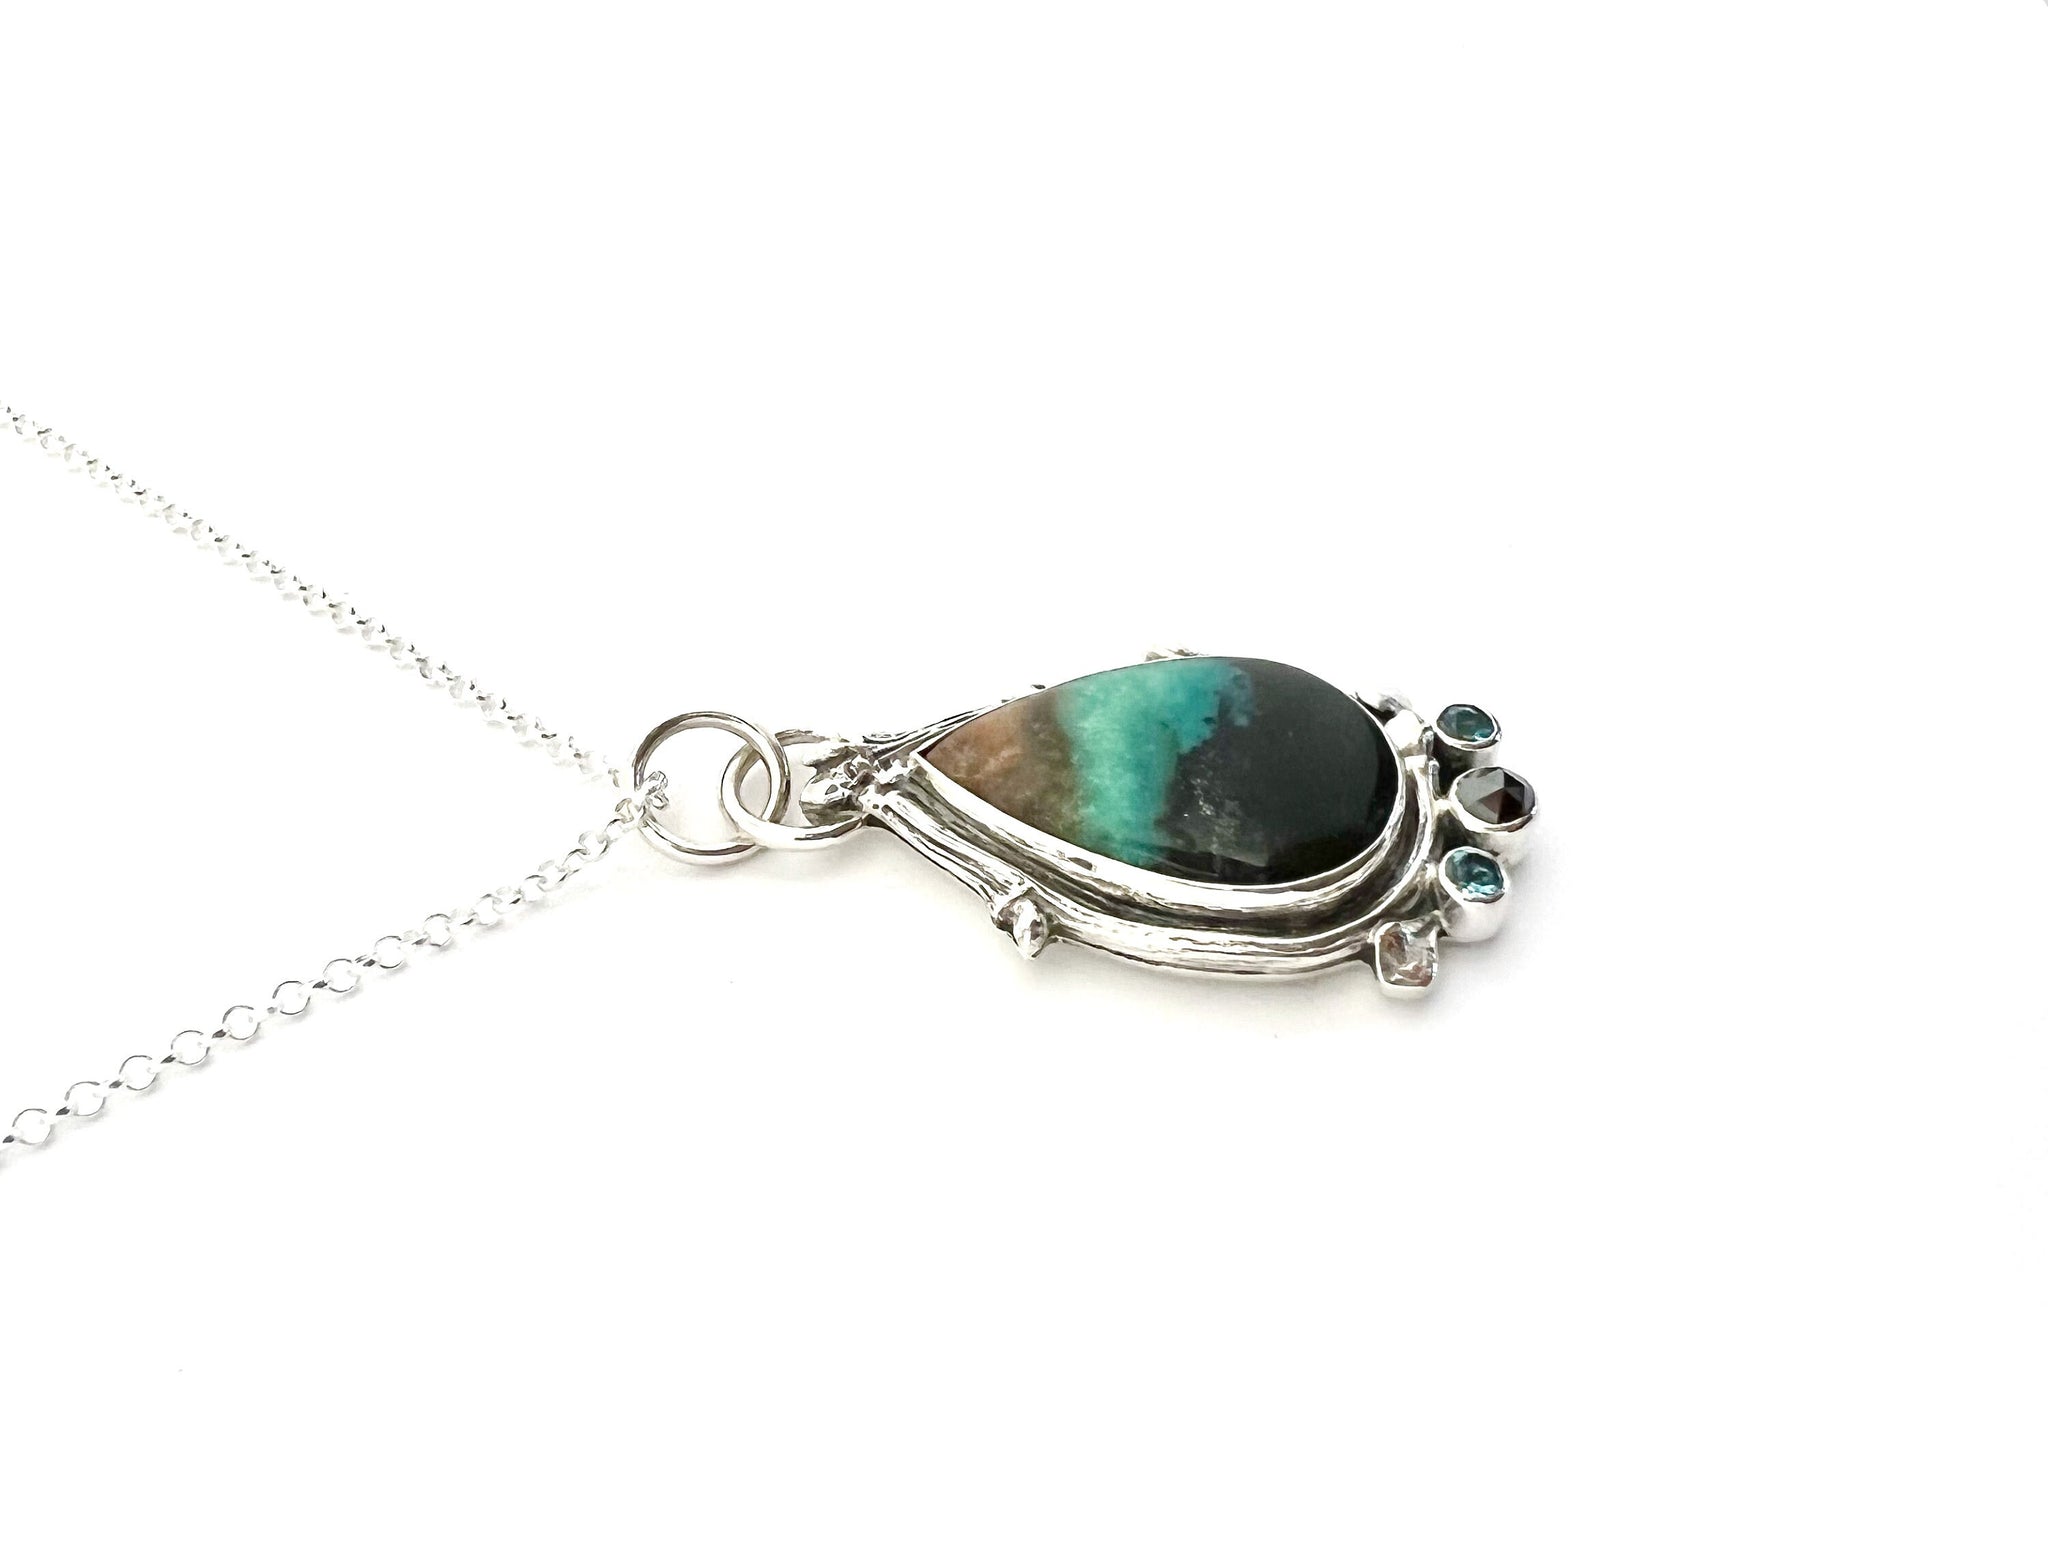 Indonesian Opalized Wood With Black Diamond and Aquamarines, OOAK Gemstone Necklace in Sterling Silver